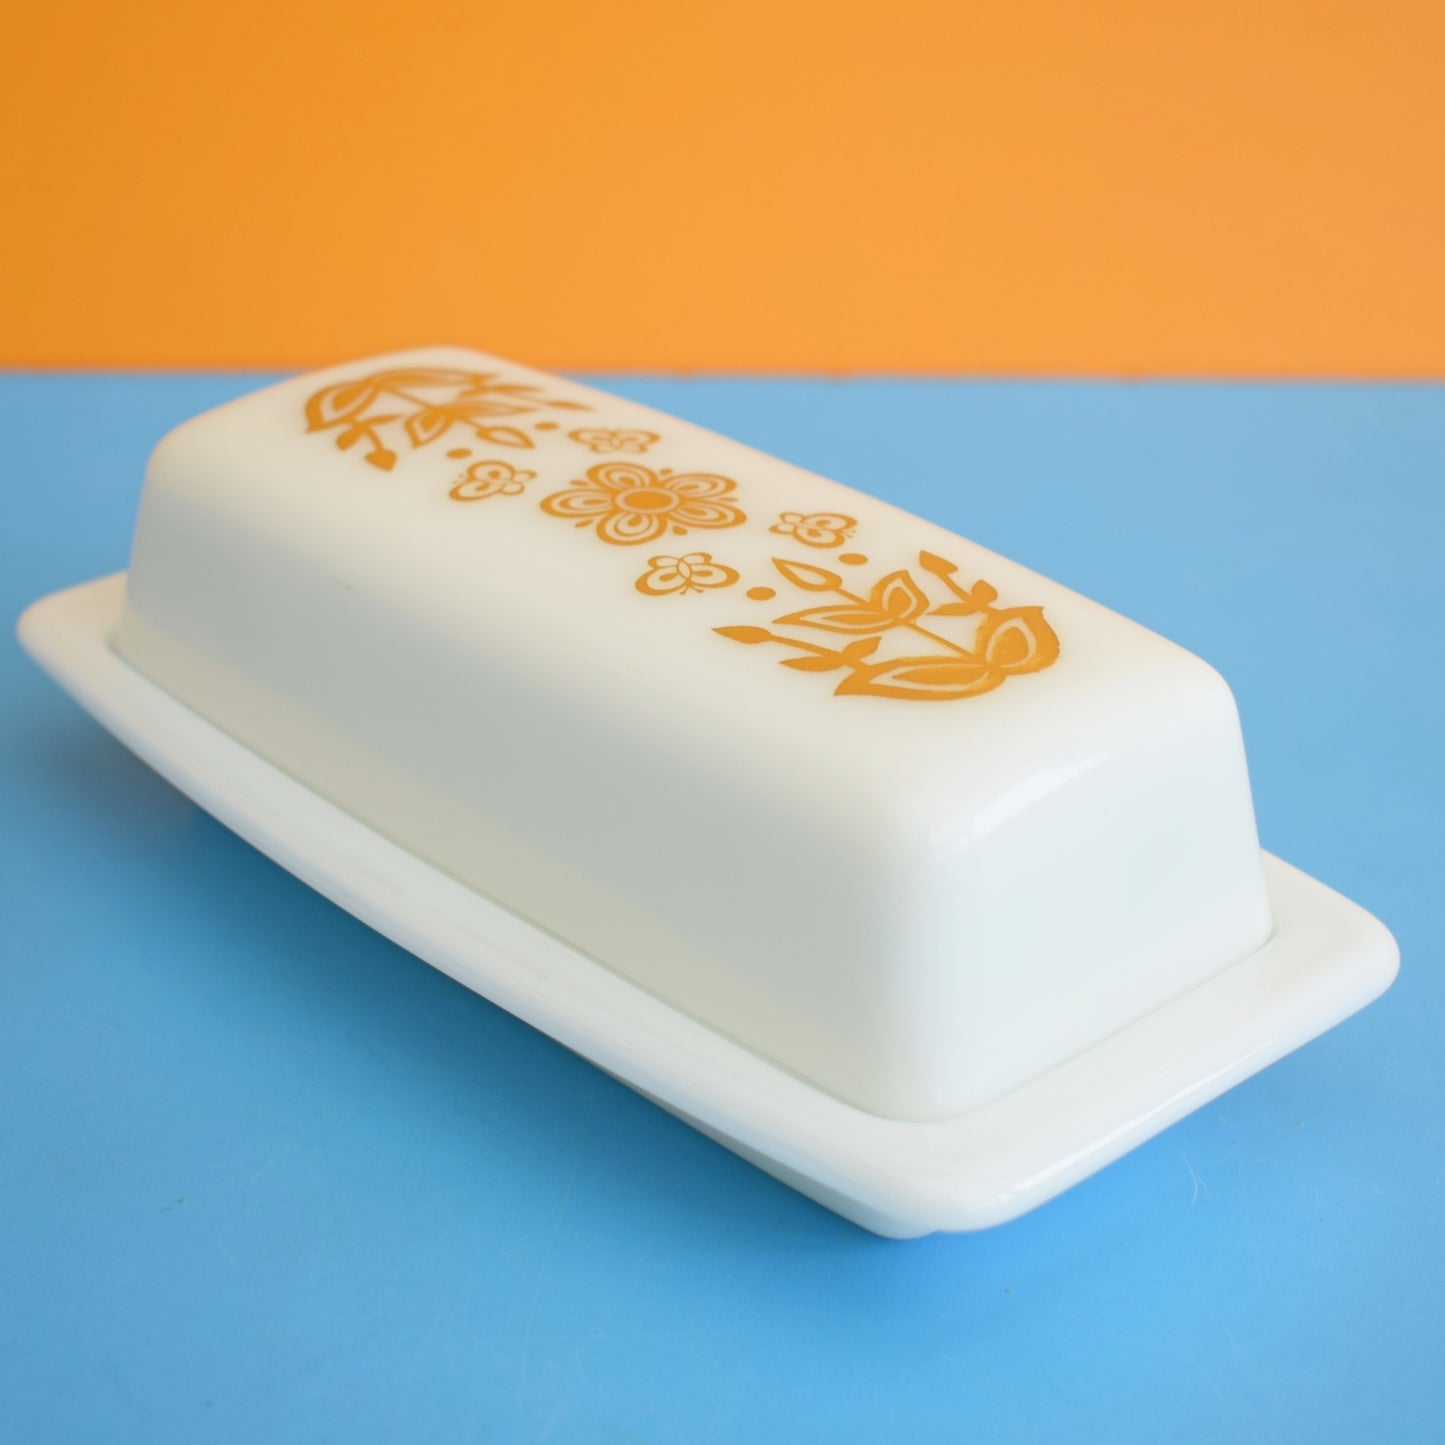 Vintage 1970s Pyrex Butter Dish - Gold Butterfly